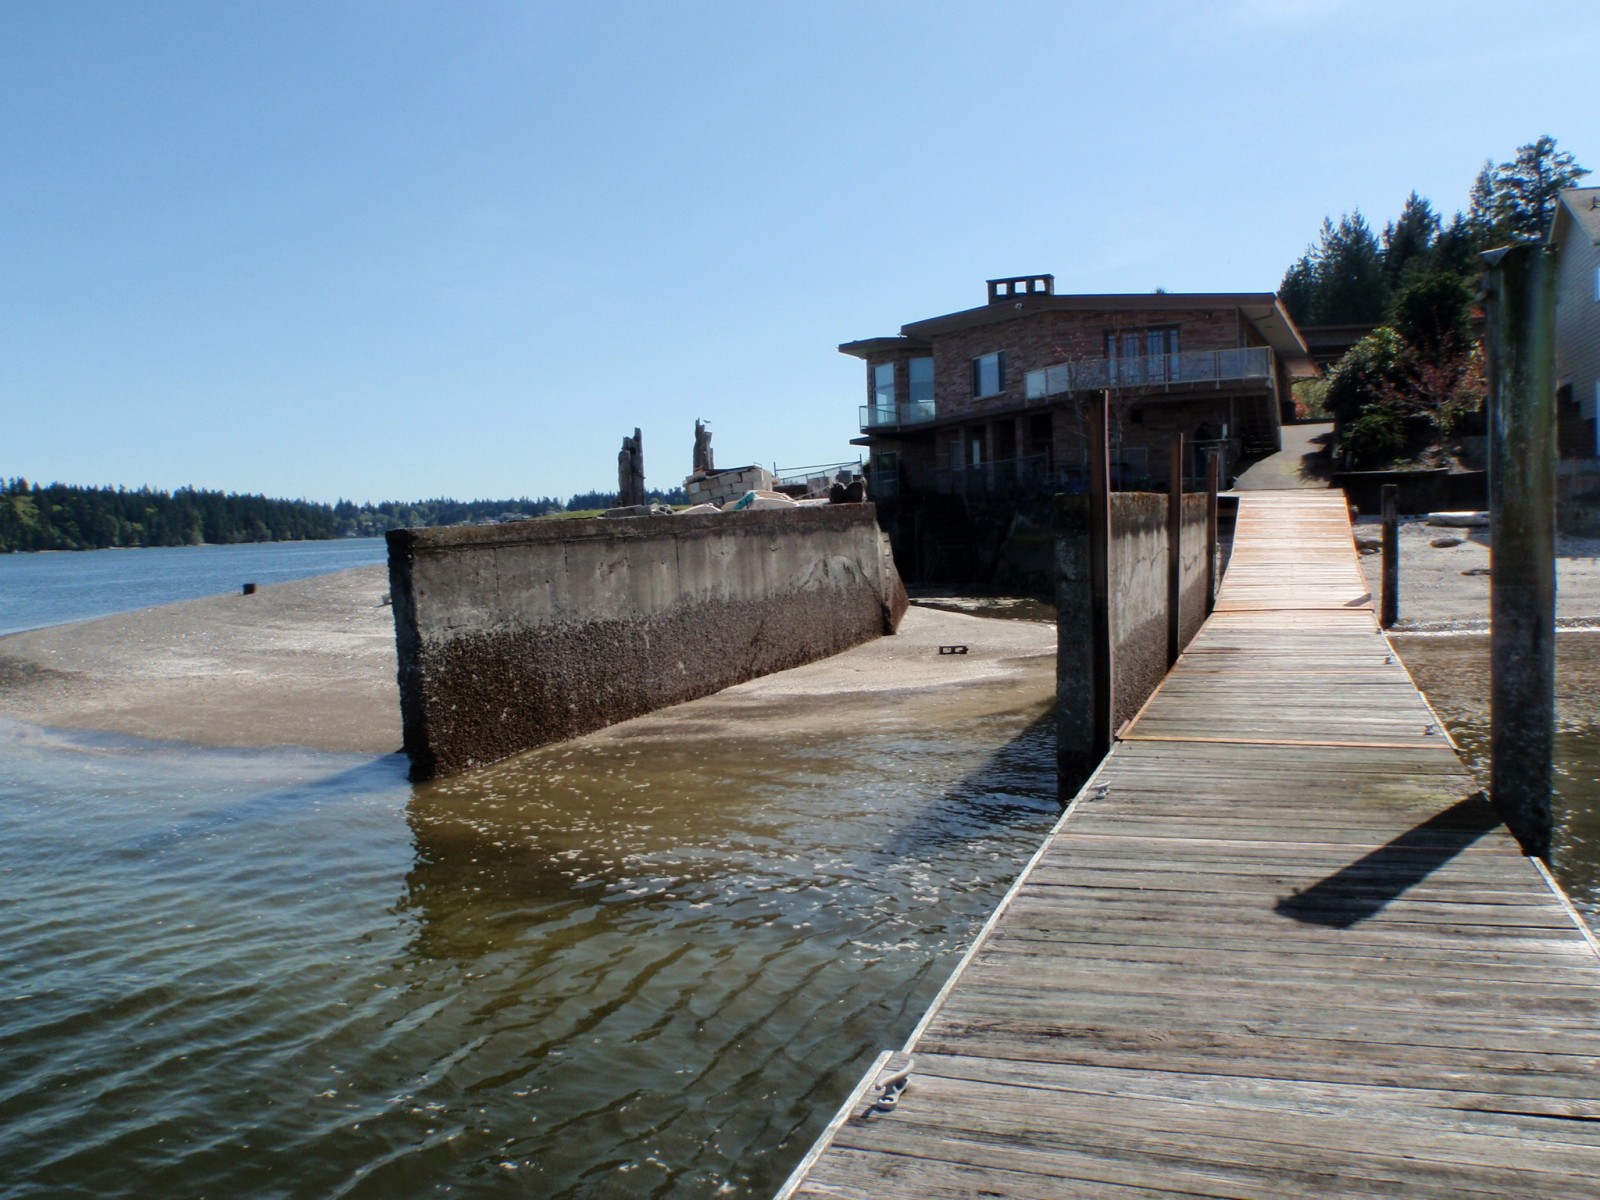 Collier Boat Ramp and Jetty Removal, Puget Sound, WA (2014)